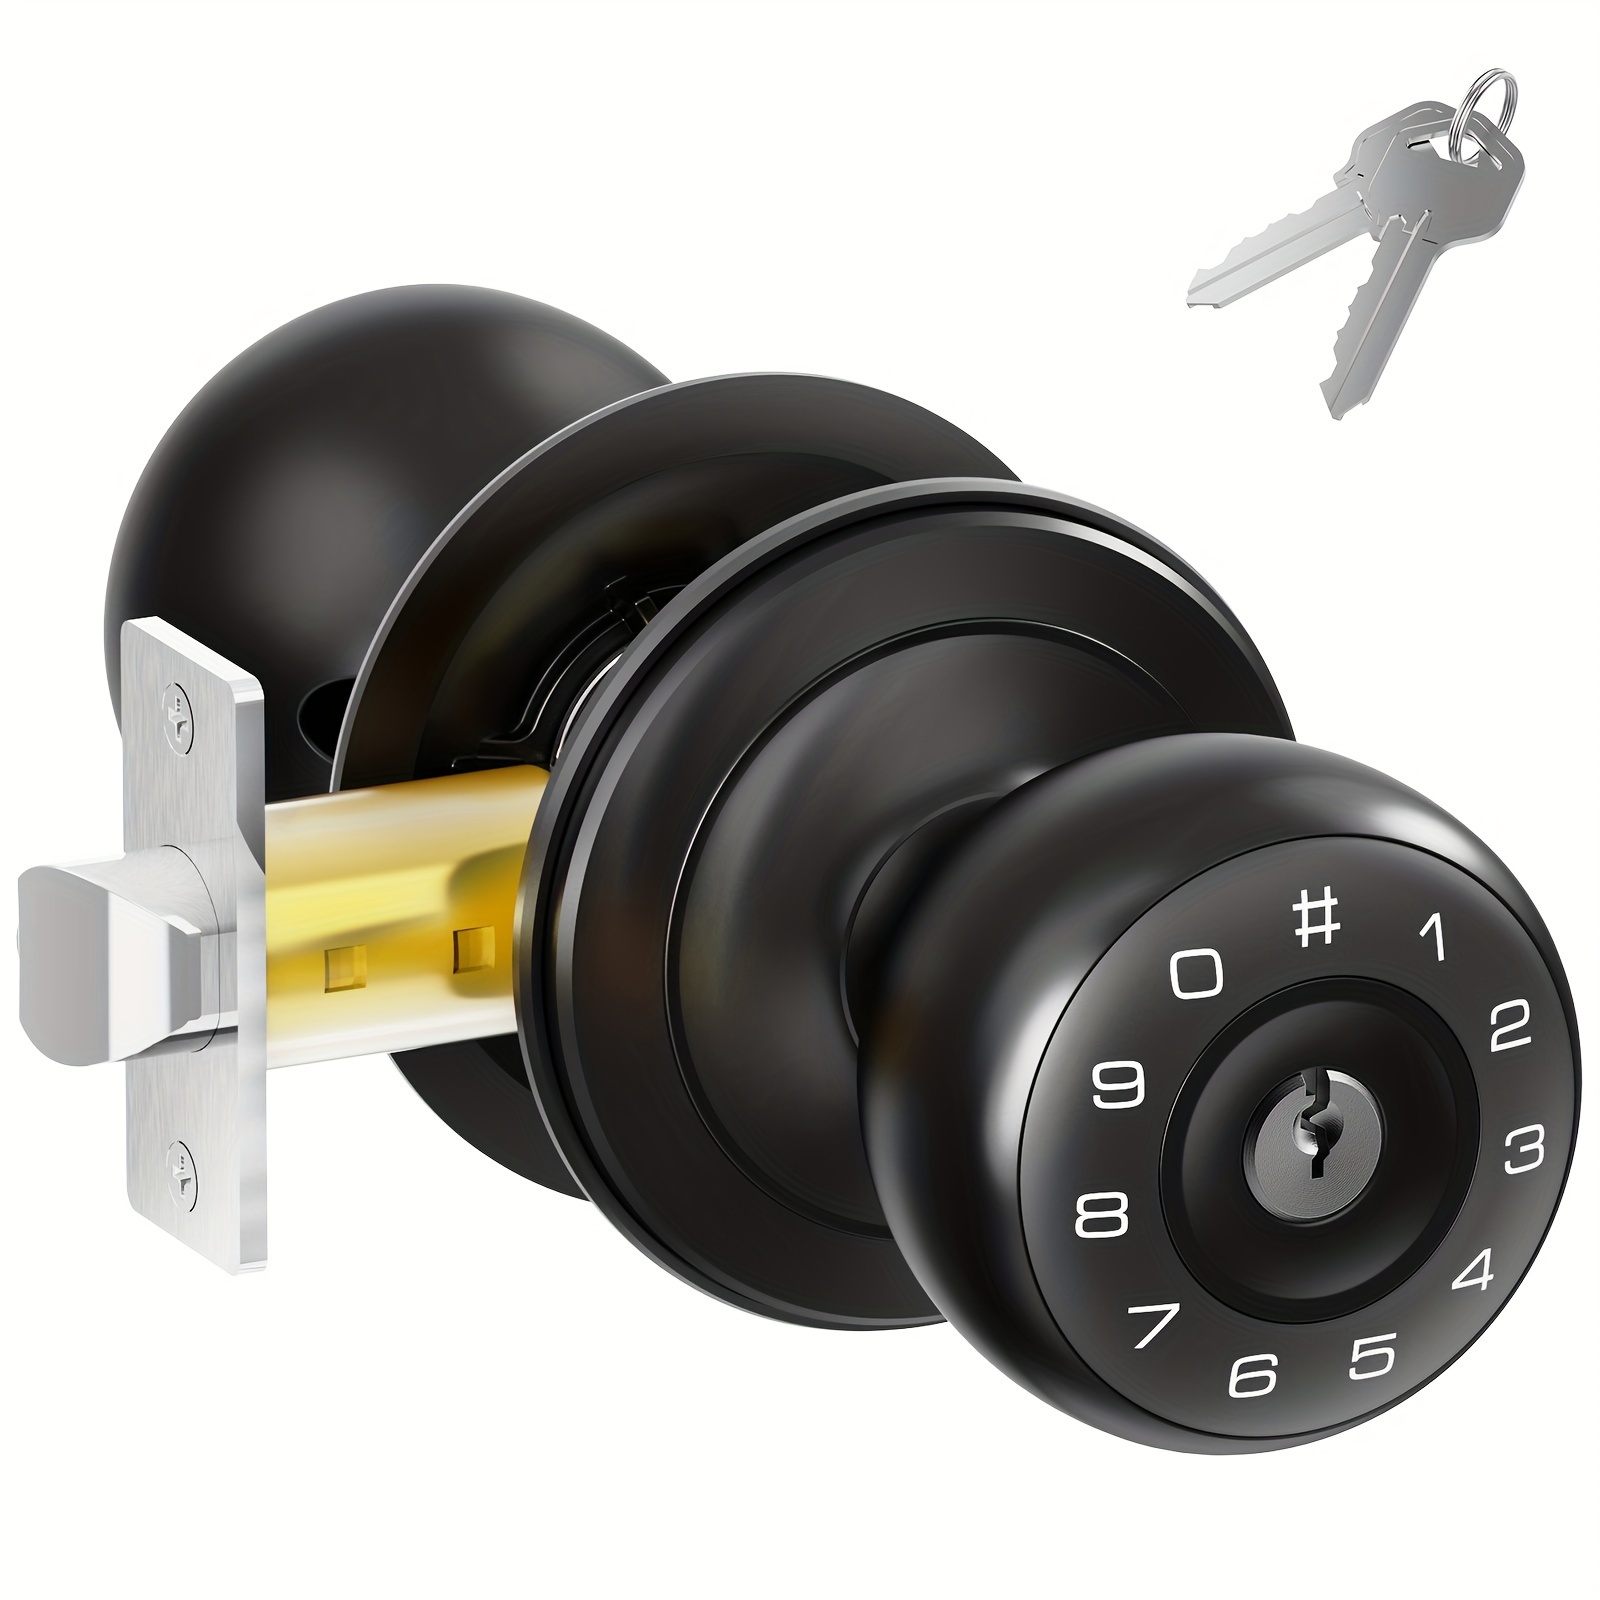 

Door Knob With Keypad, Keyless Entry Door Lock With 100 Codes, Auto Lock, 2 Keys Included, Anti-peeping Password, Battery Powered (batteries Not Included) Easy Installation